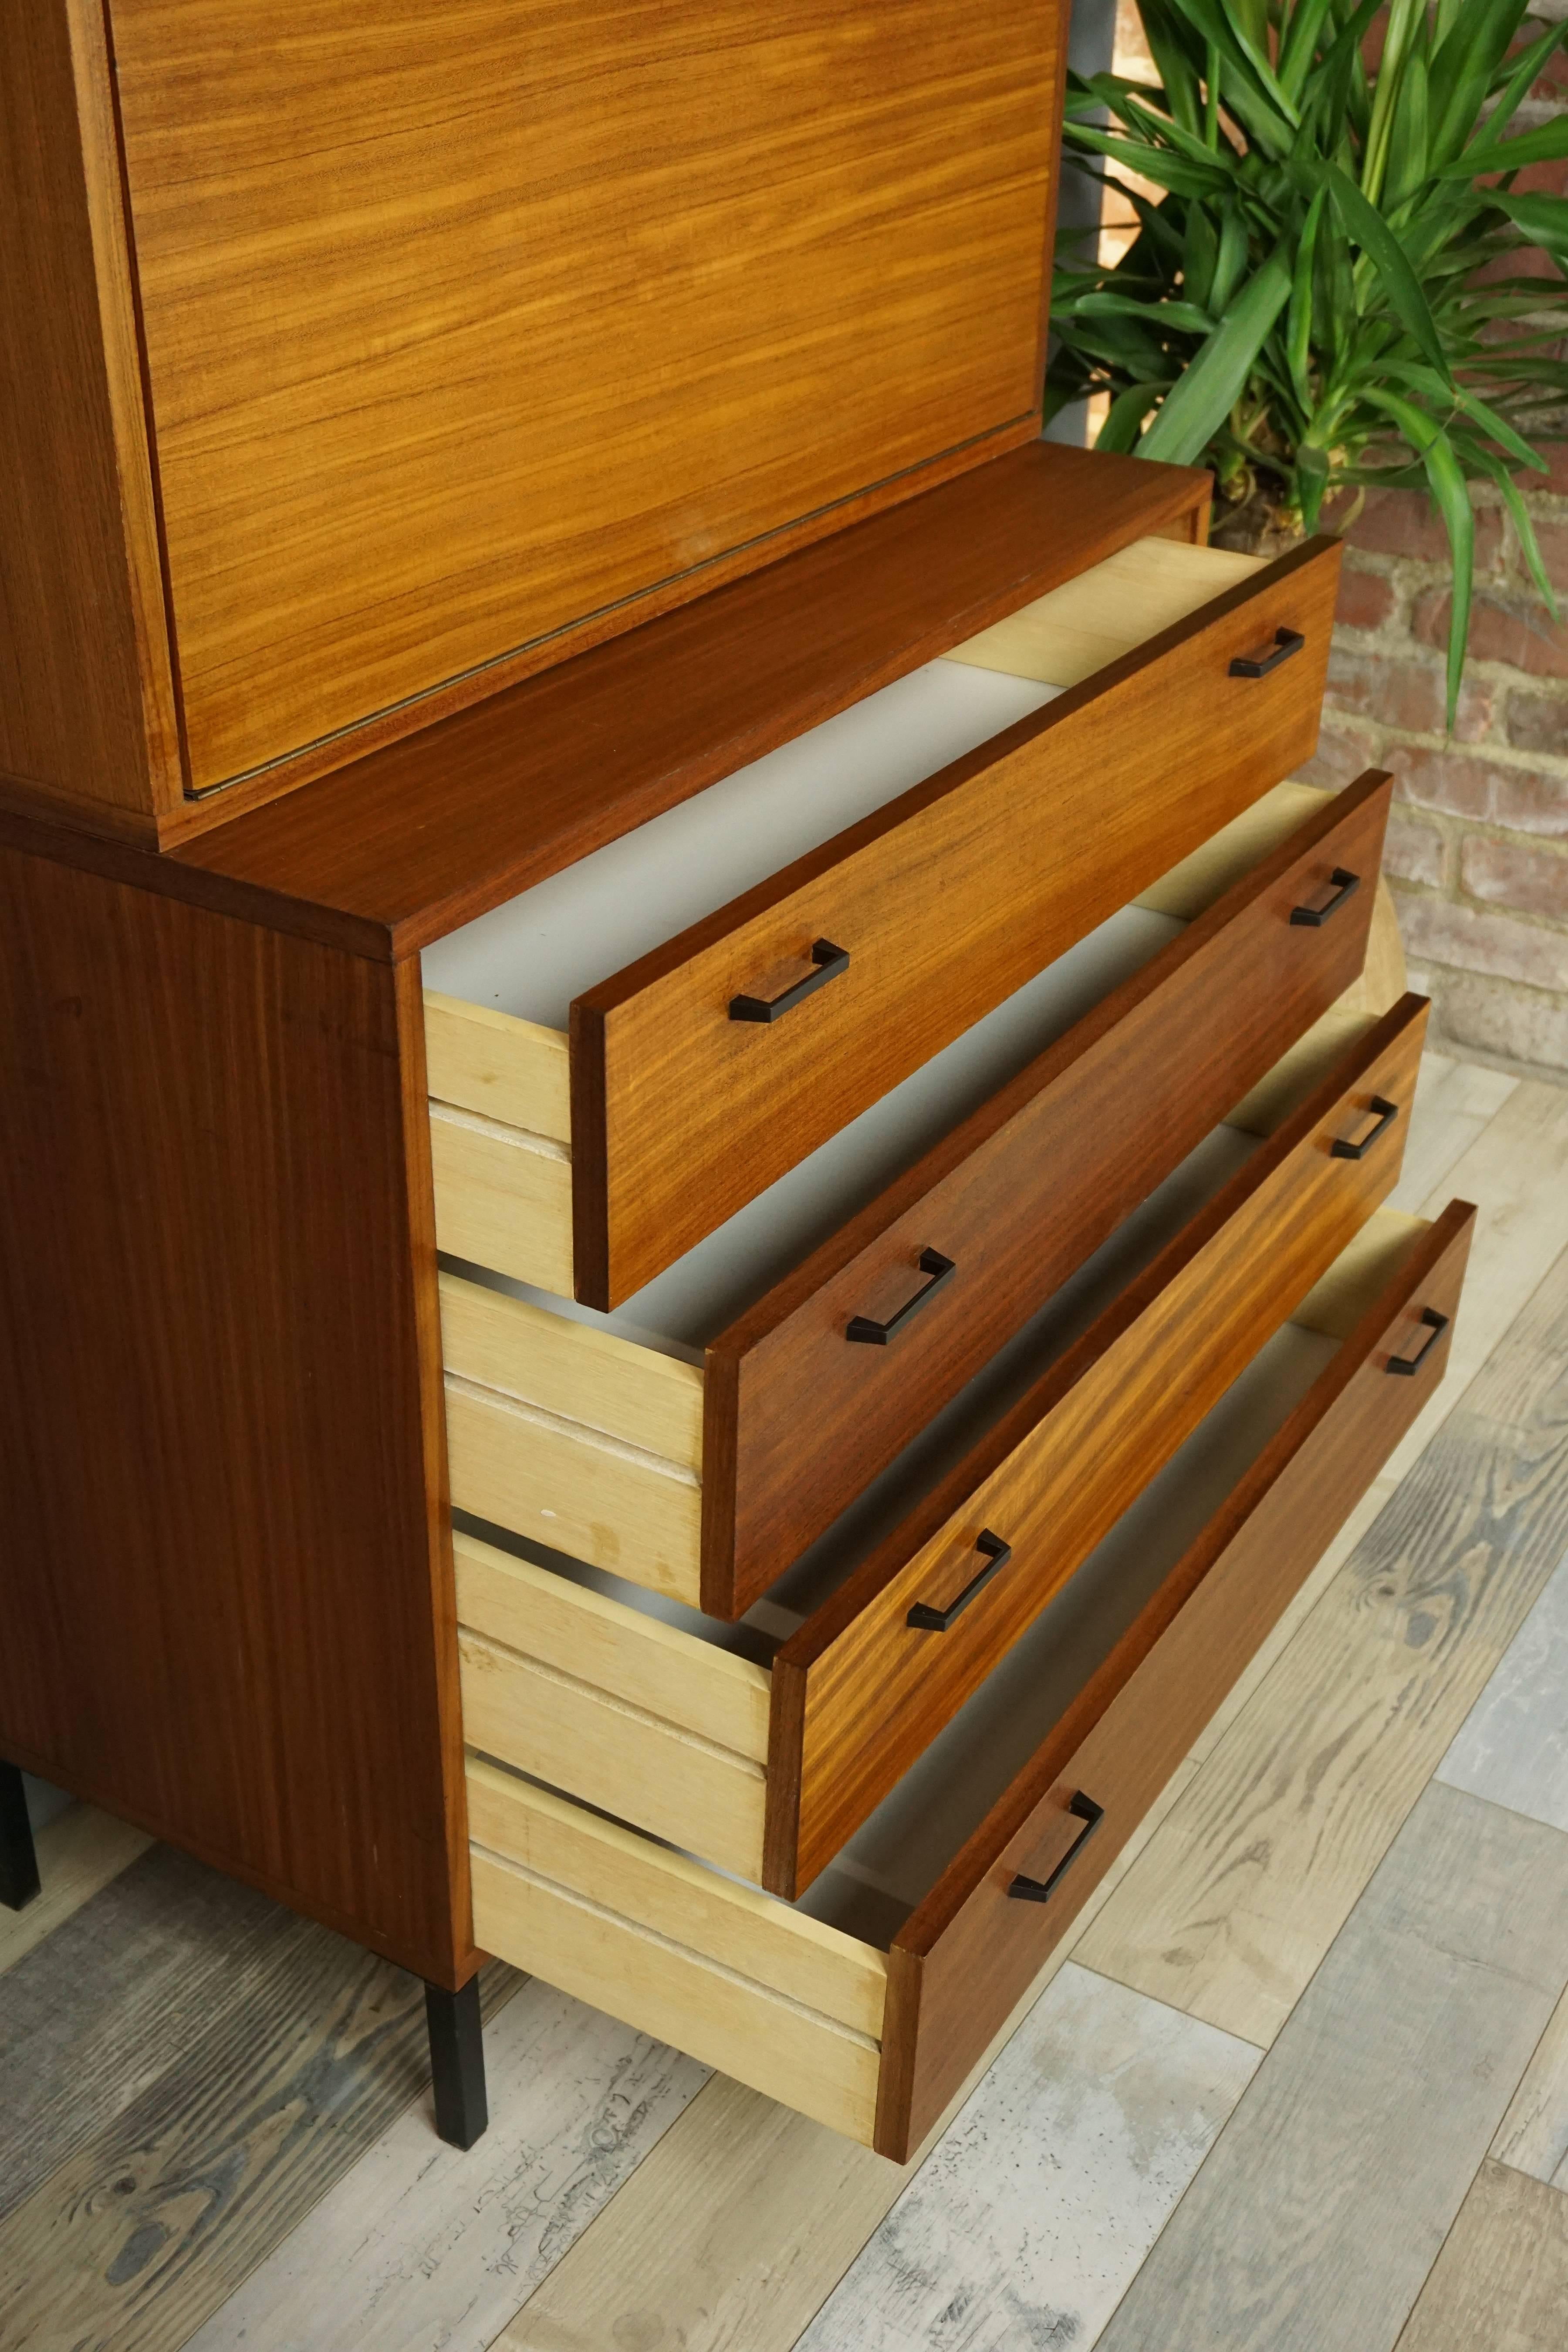 Wooden Teak Metal and Glass Modular Wall Unit From the 1950s 9